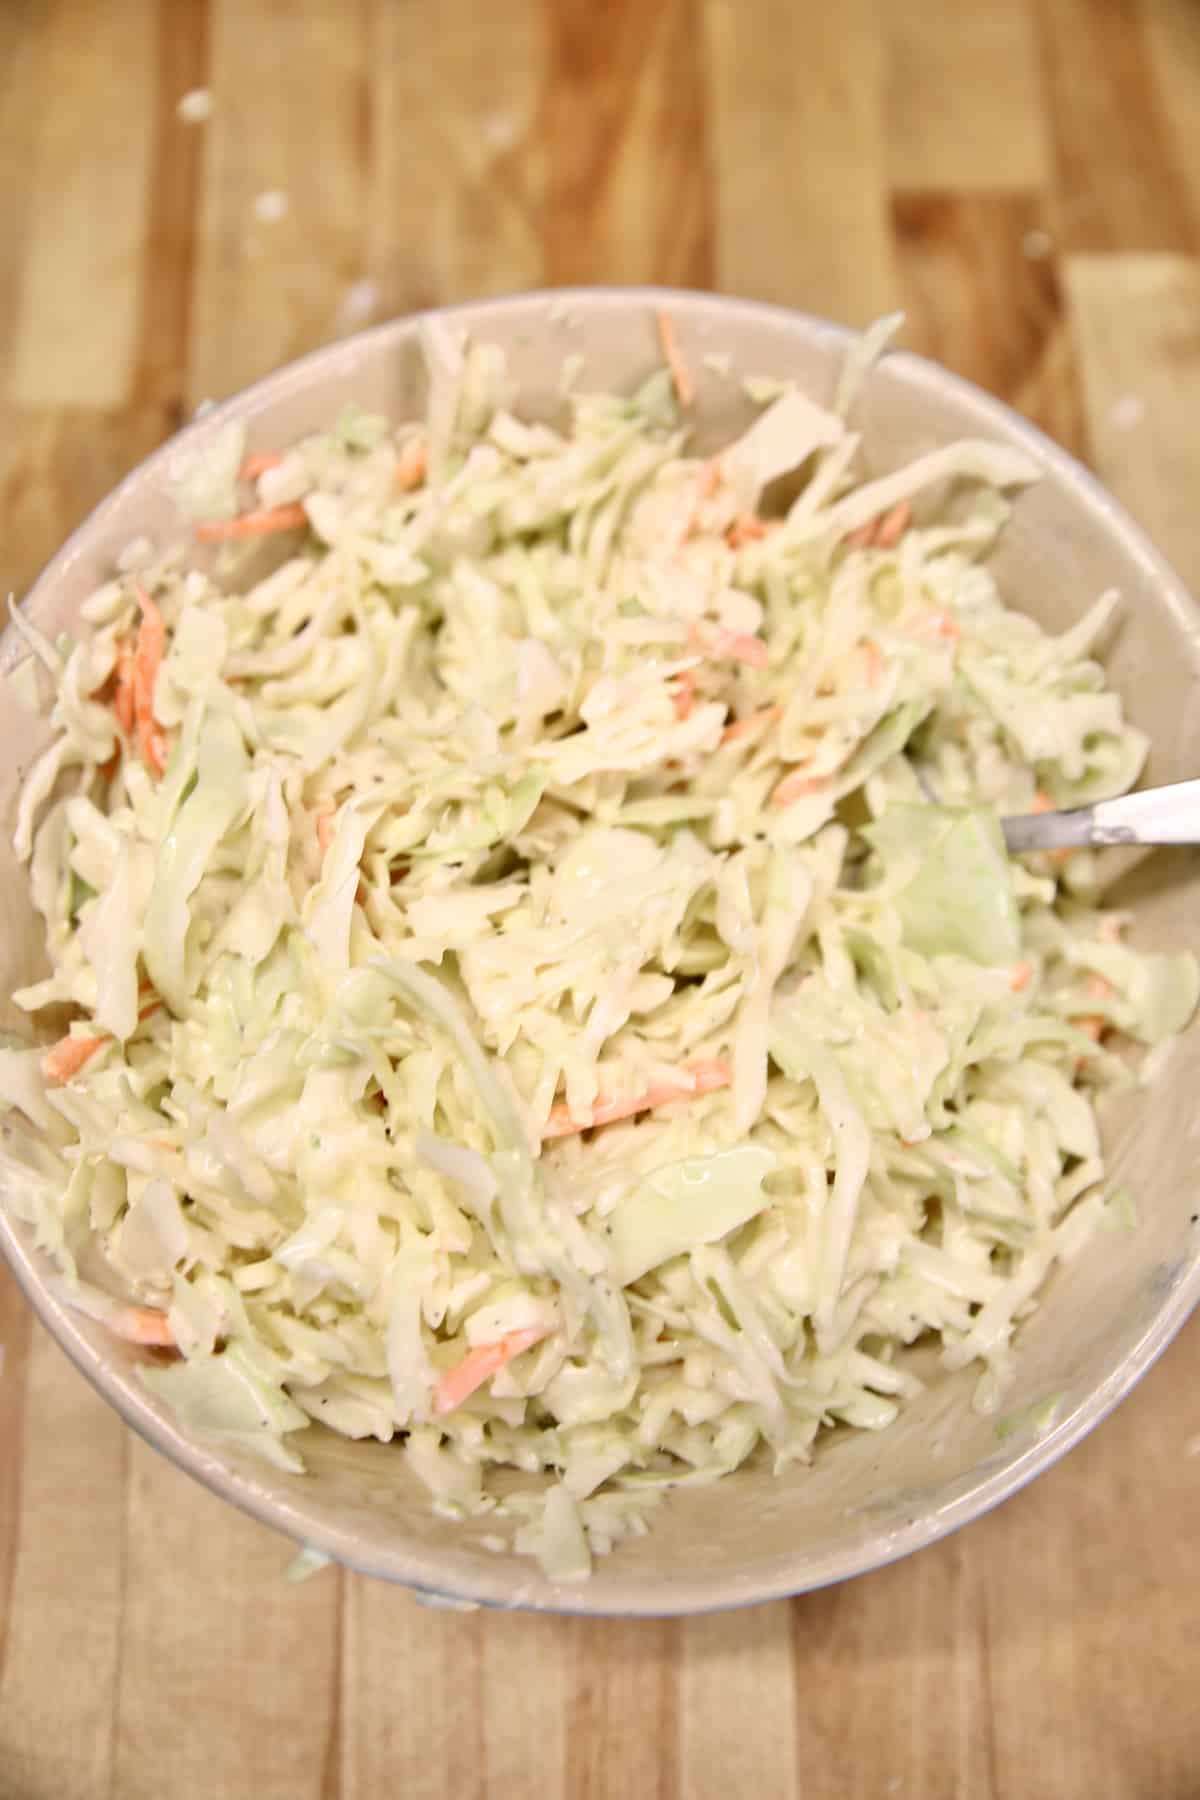 Bowl of creamy coleslaw with cabbage and carrots.